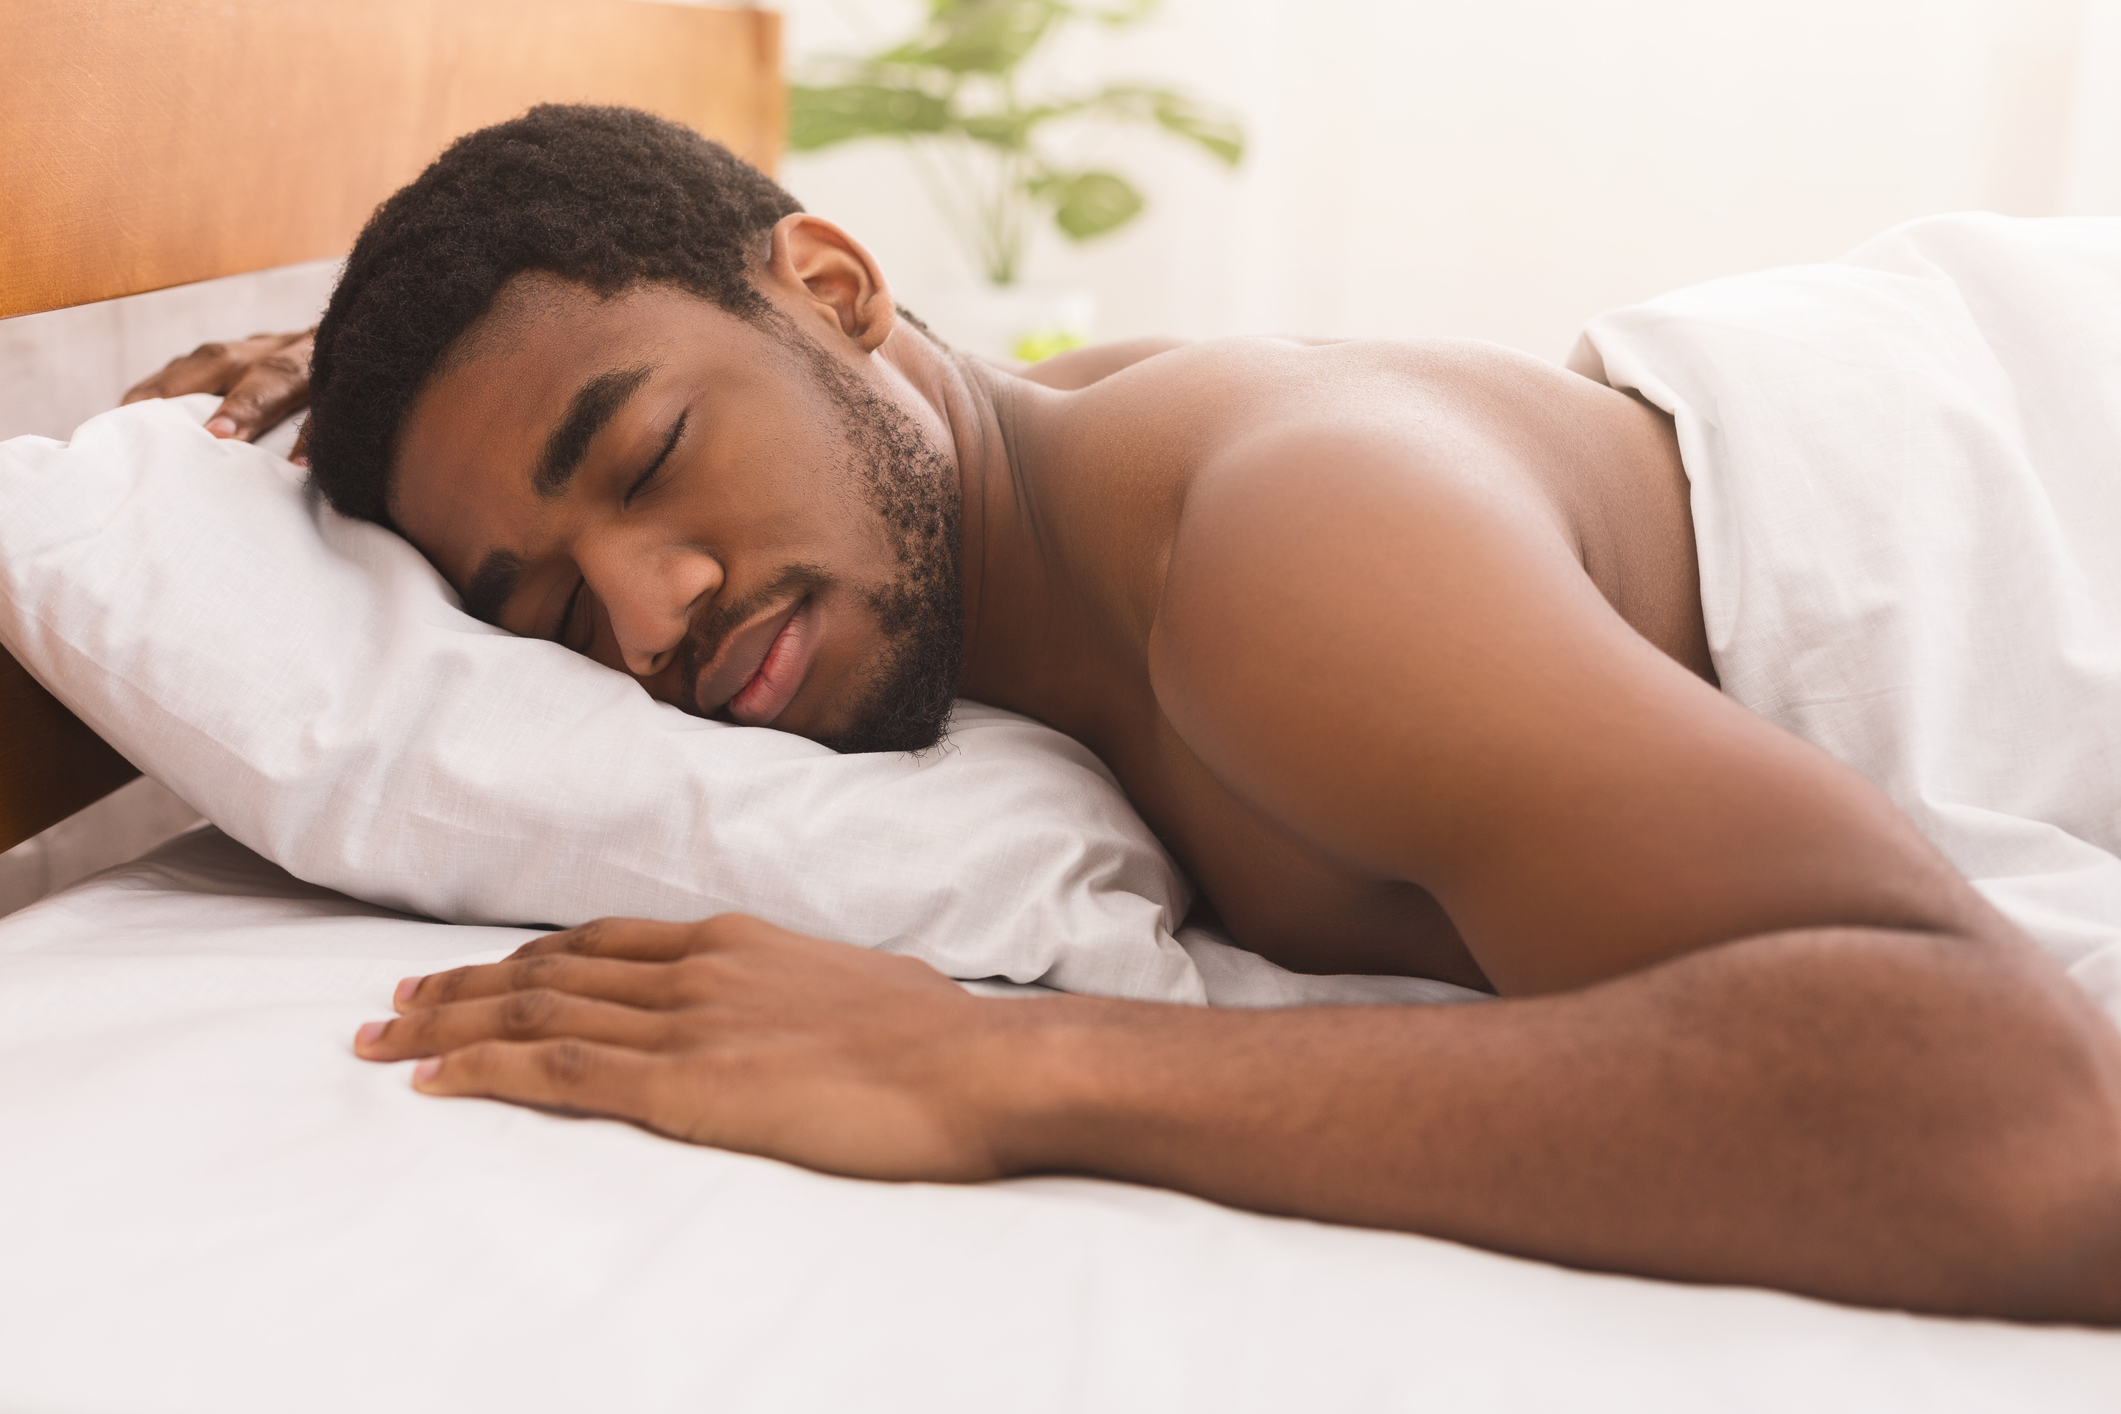 Is Sleeping Naked Better for Your Health? Sleep Foundation